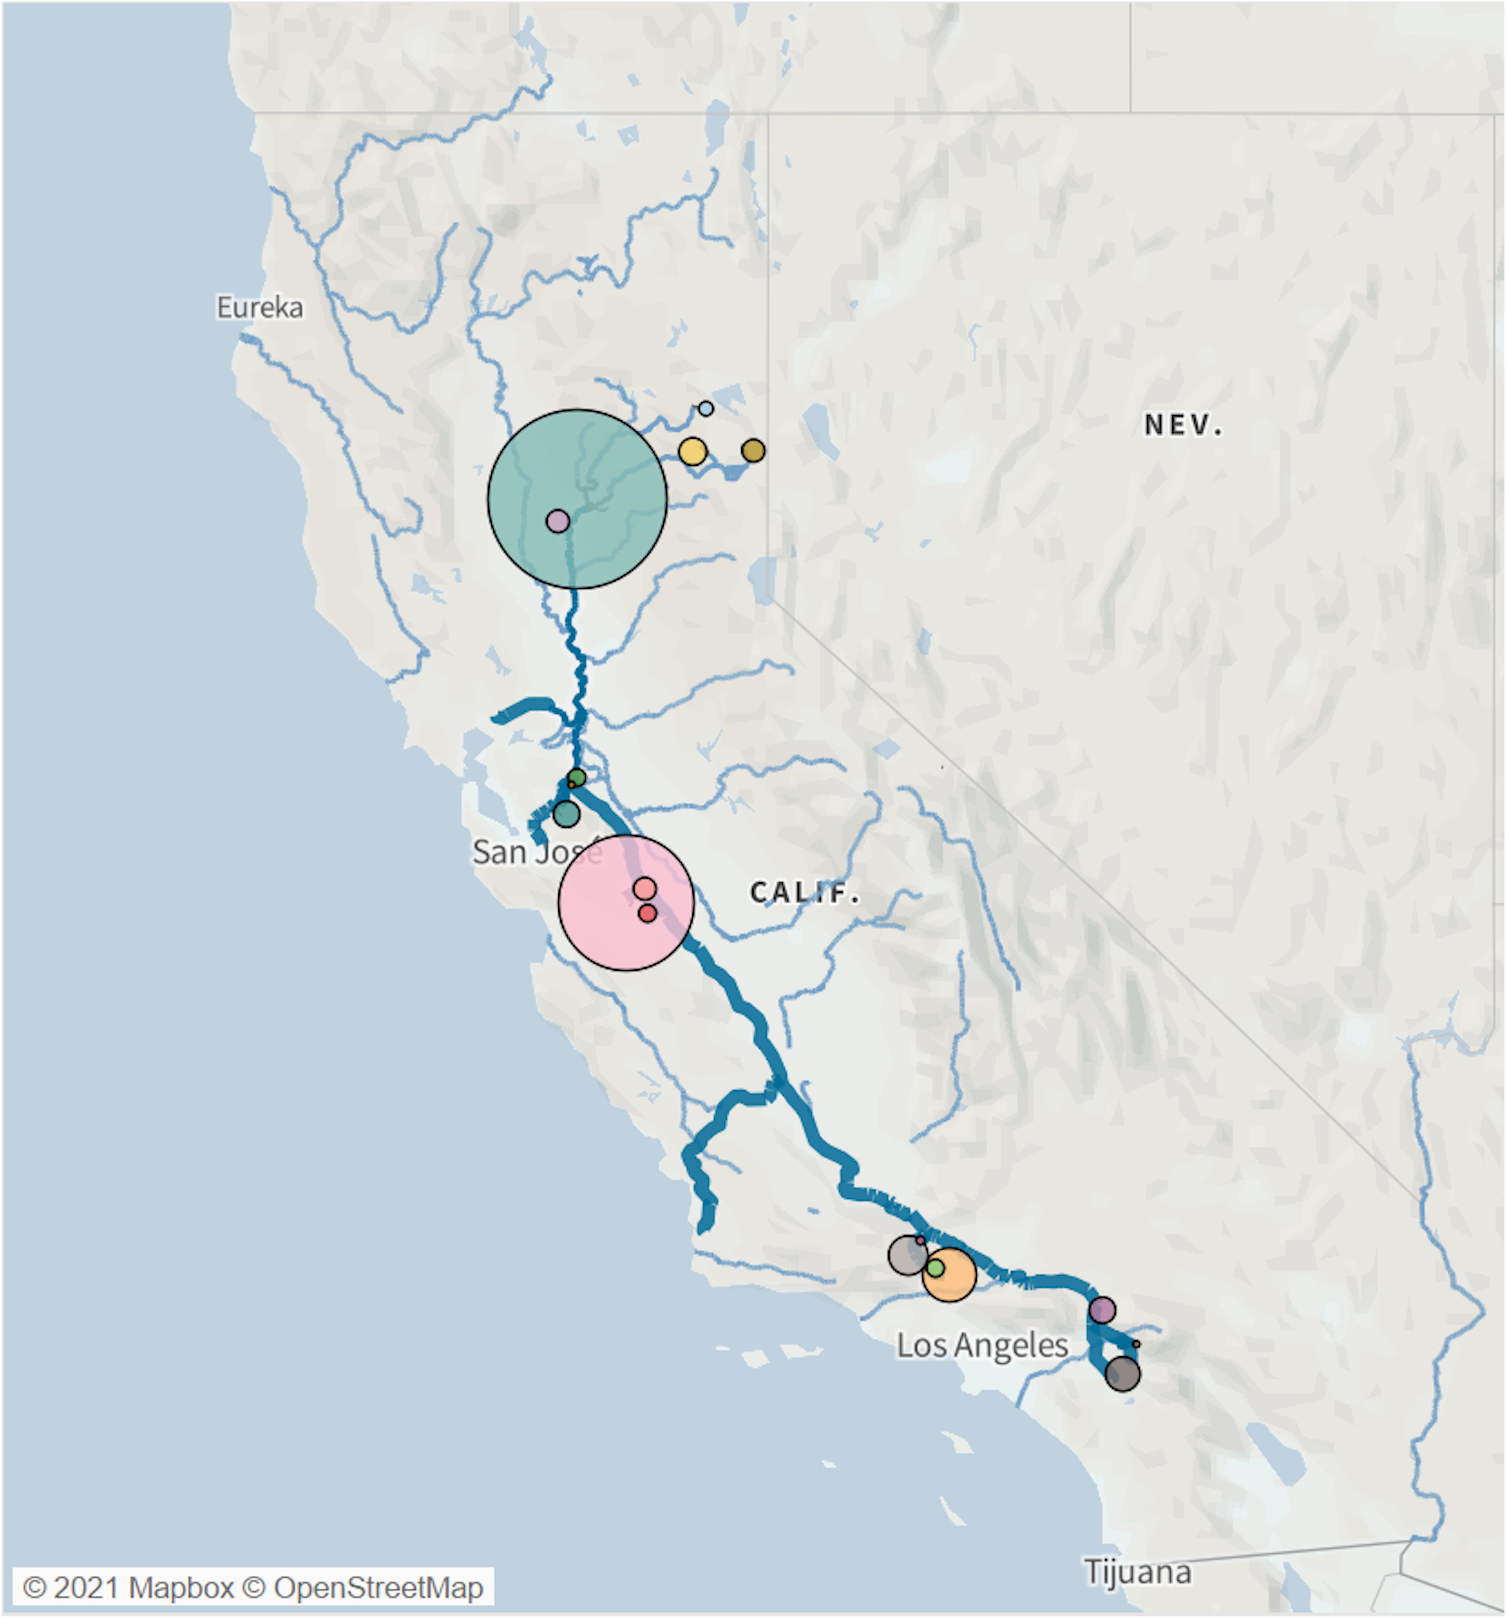 California State Water Project map 